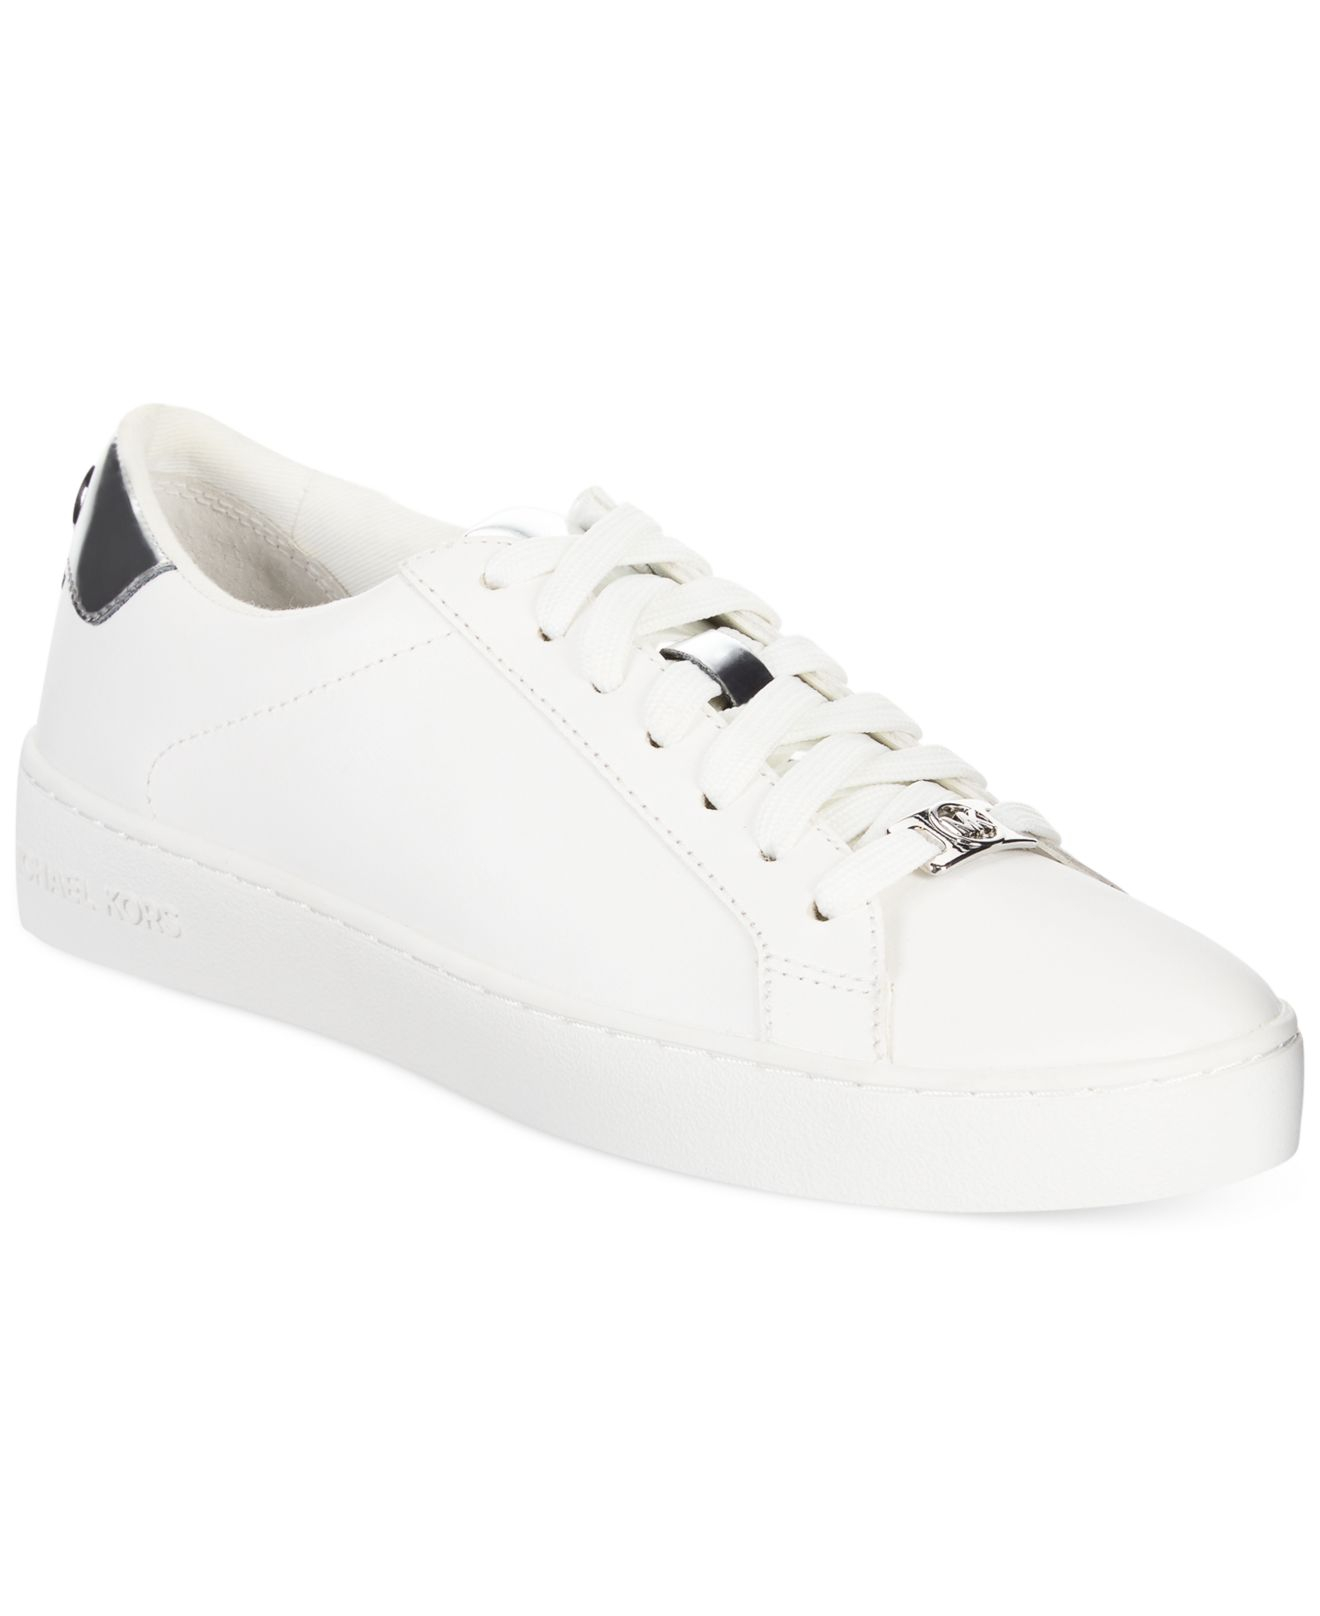 michael kors irving lace up silver